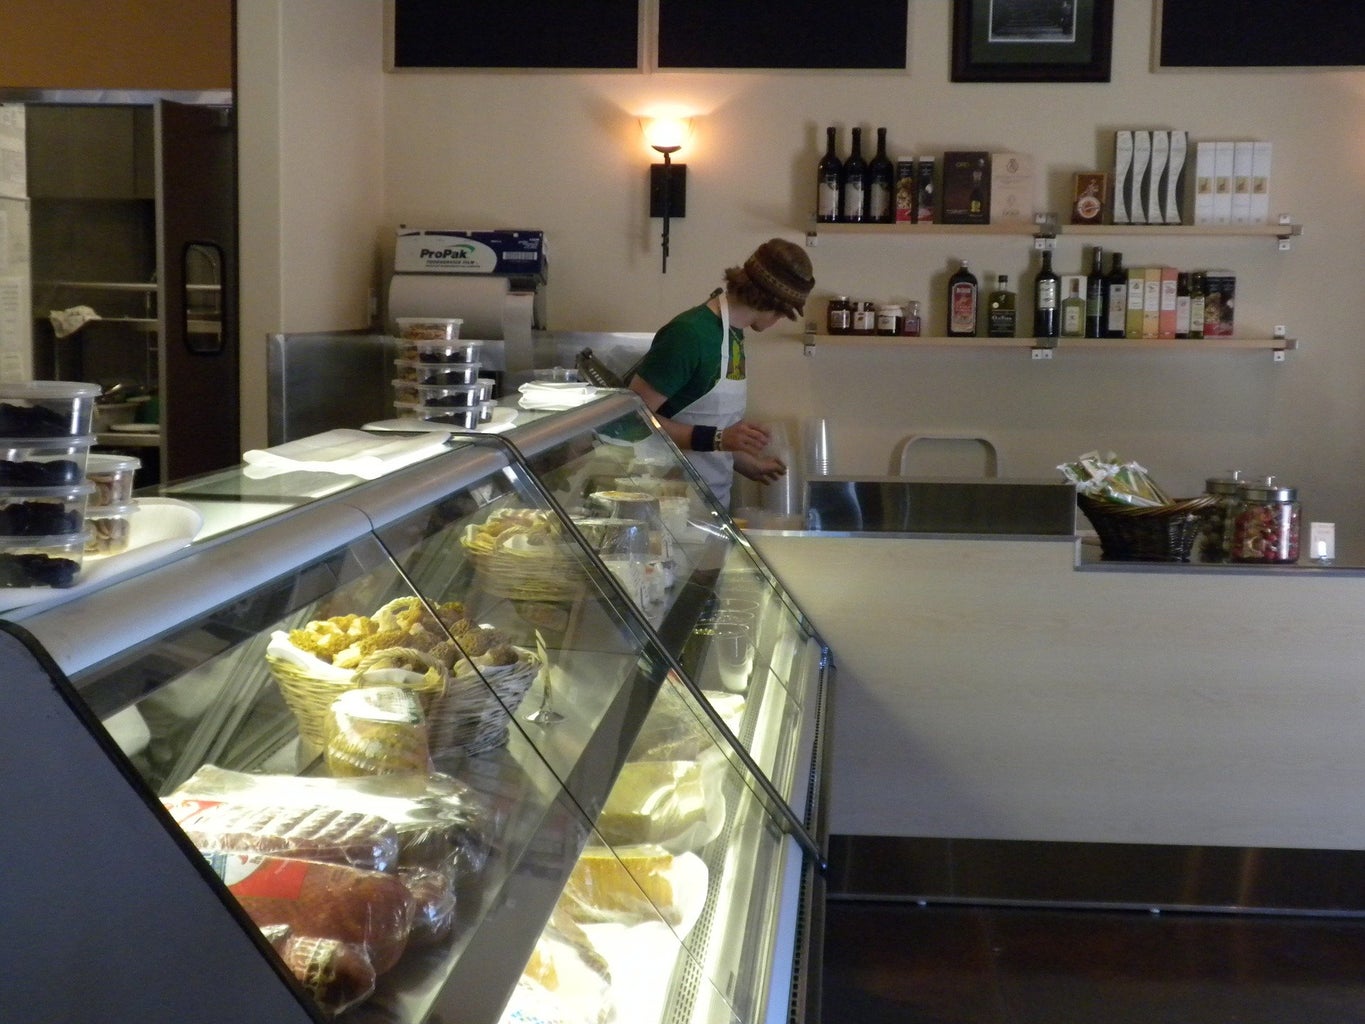 a bakery counter in a grocery store. a man stands behind it, facing away from the camera.